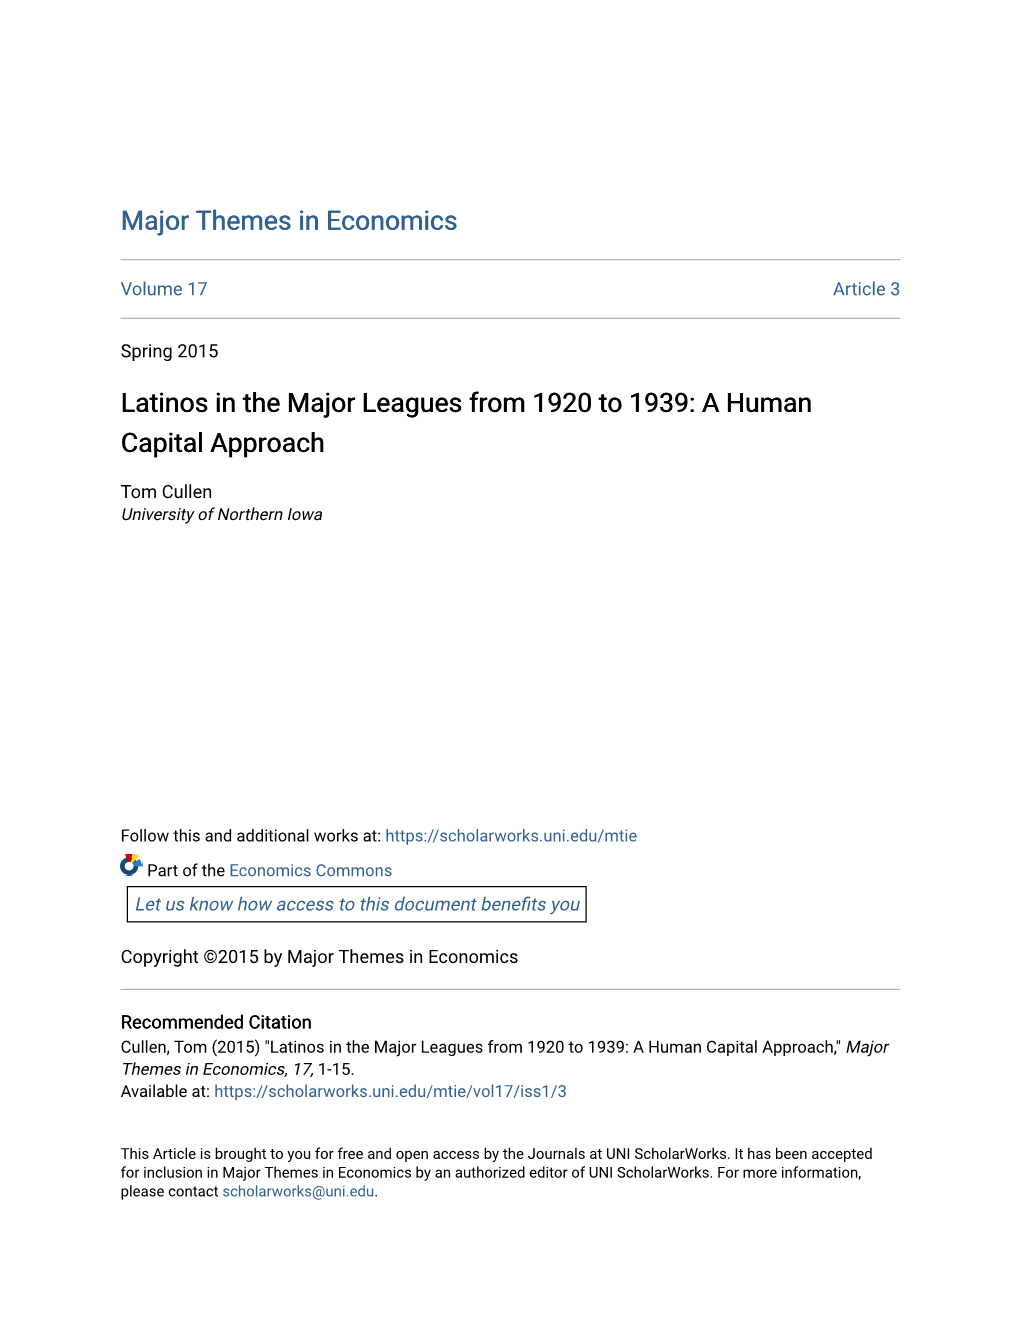 Latinos in the Major Leagues from 1920 to 1939: a Human Capital Approach